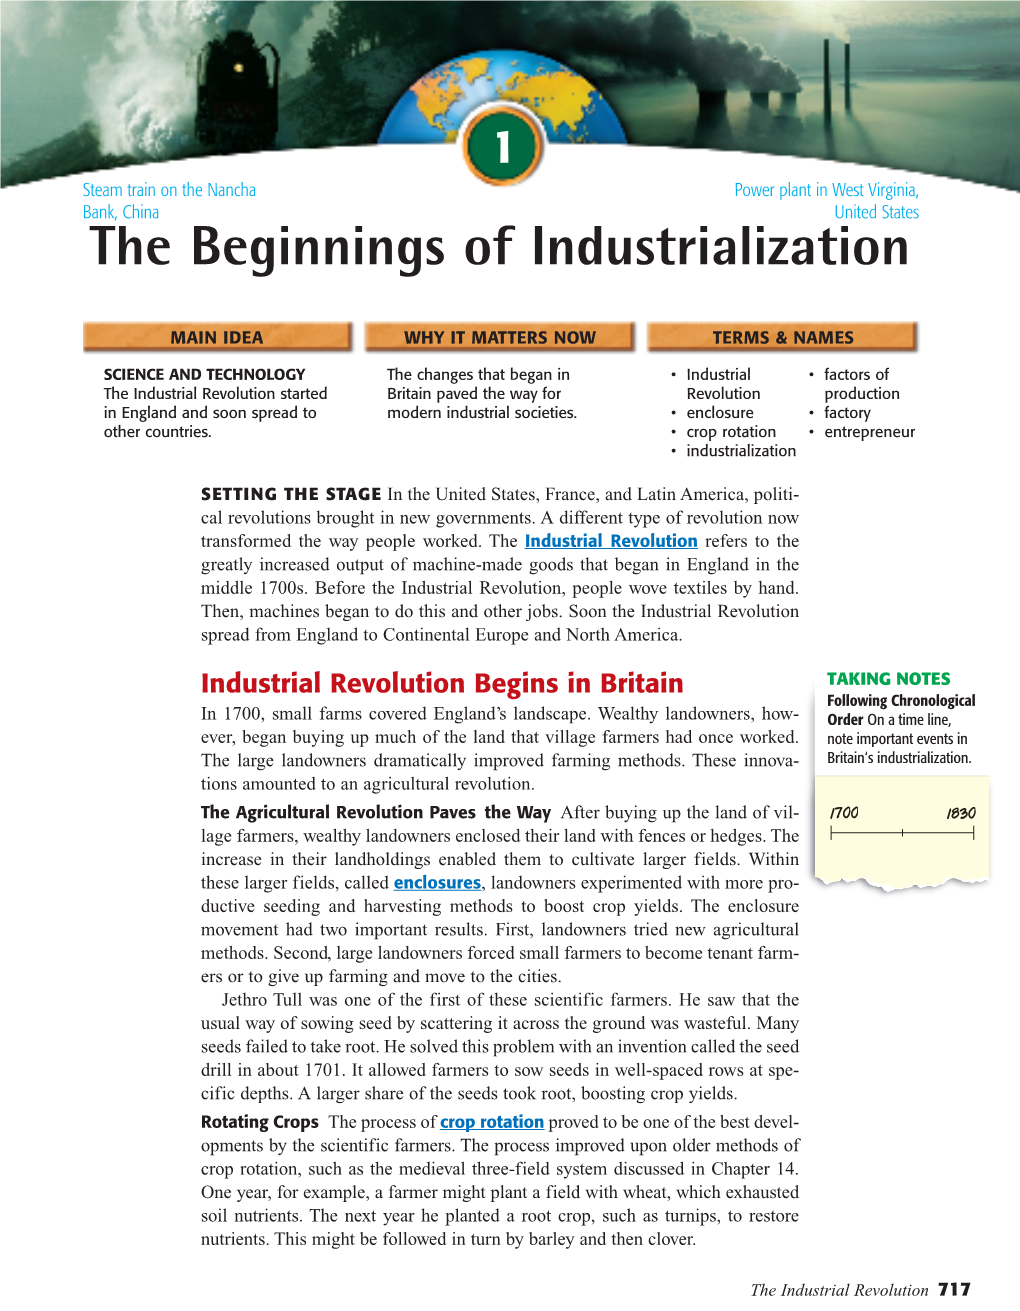 The Beginnings of Industrialization in Britain